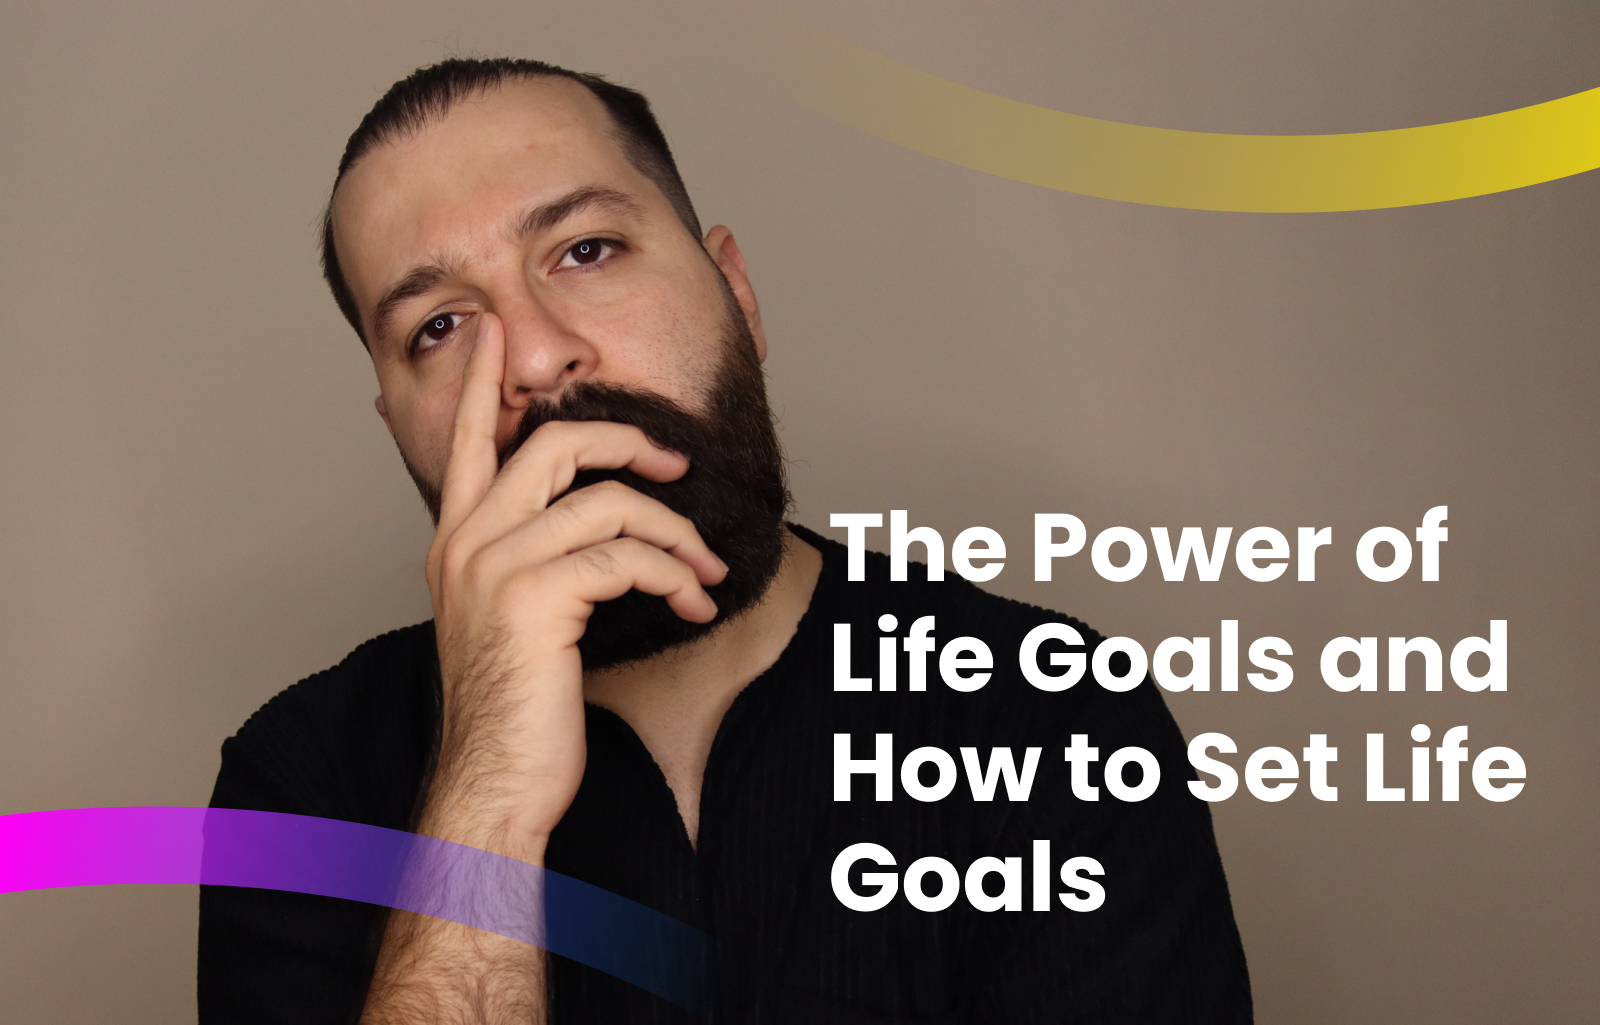 The Power of Life Goals and How to Set Life Goals